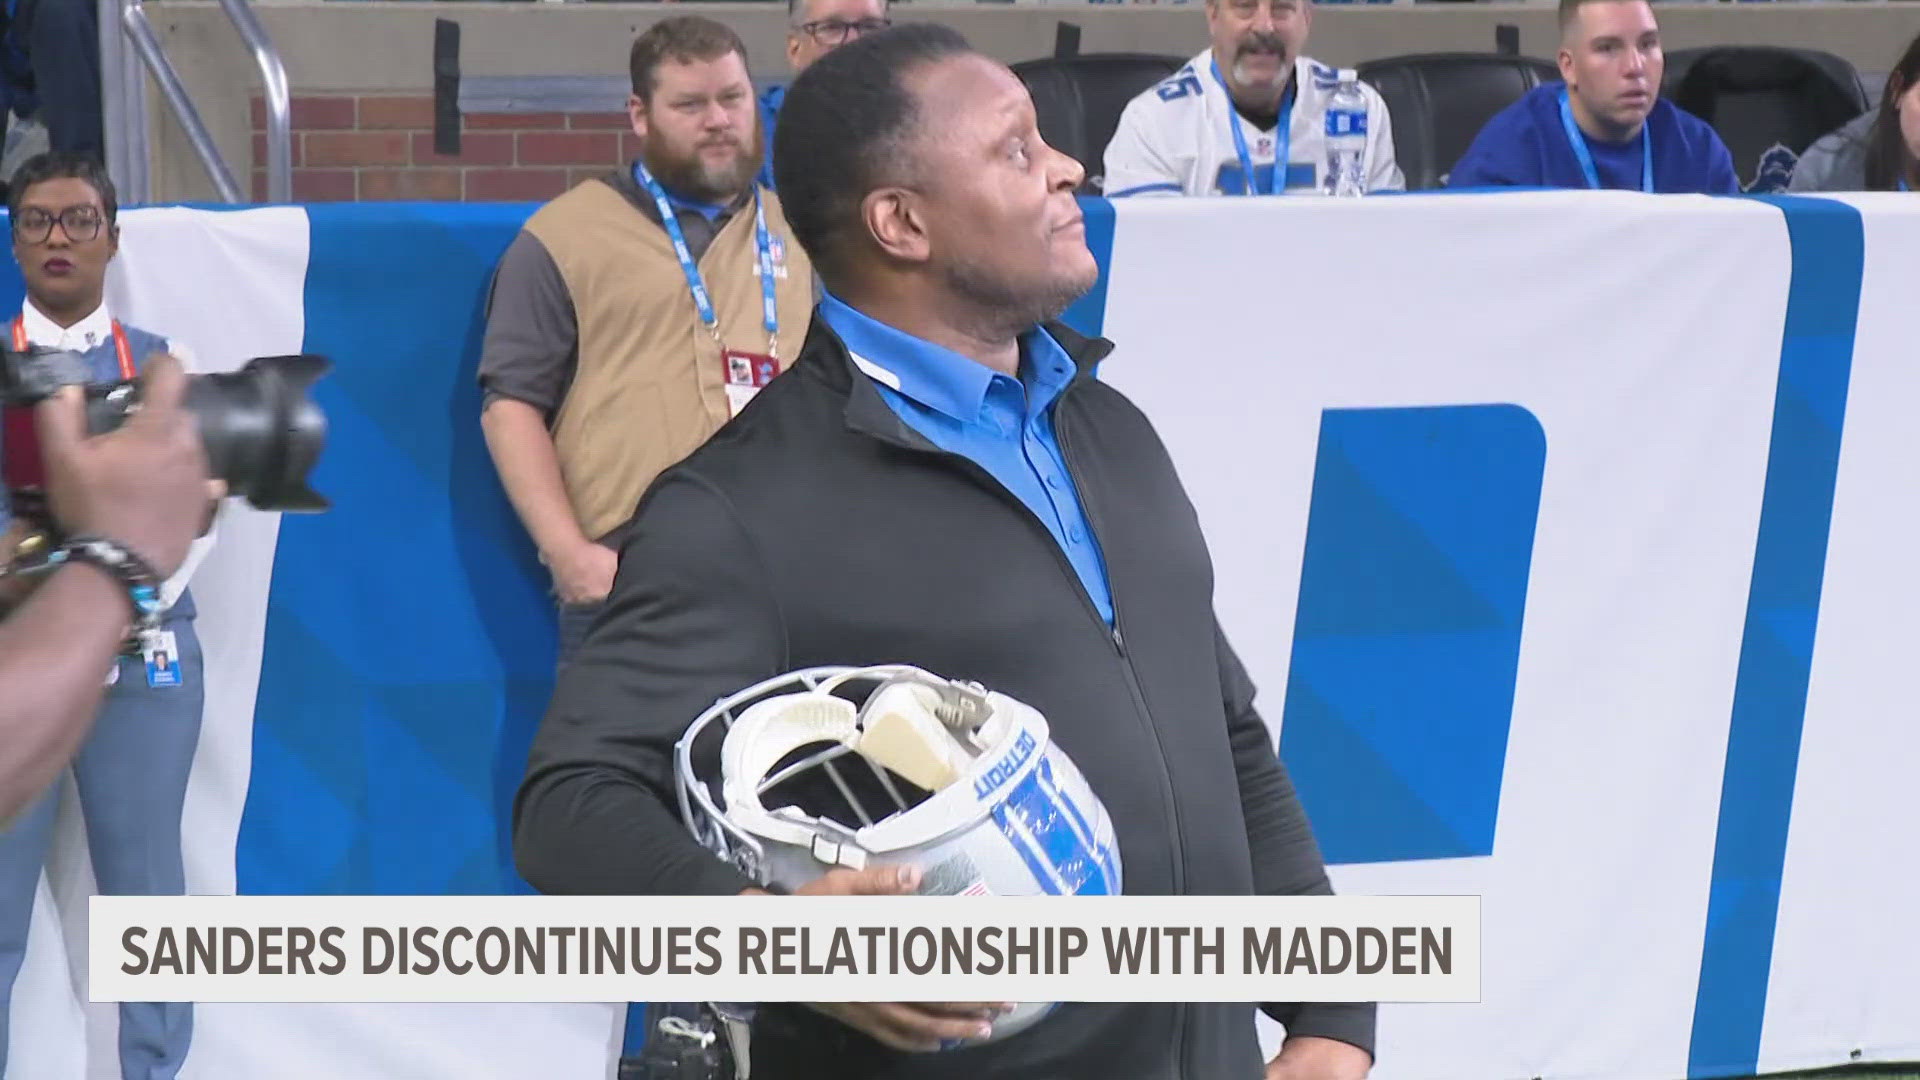 Barry Sanders discontinues relationship with Madden franchise.